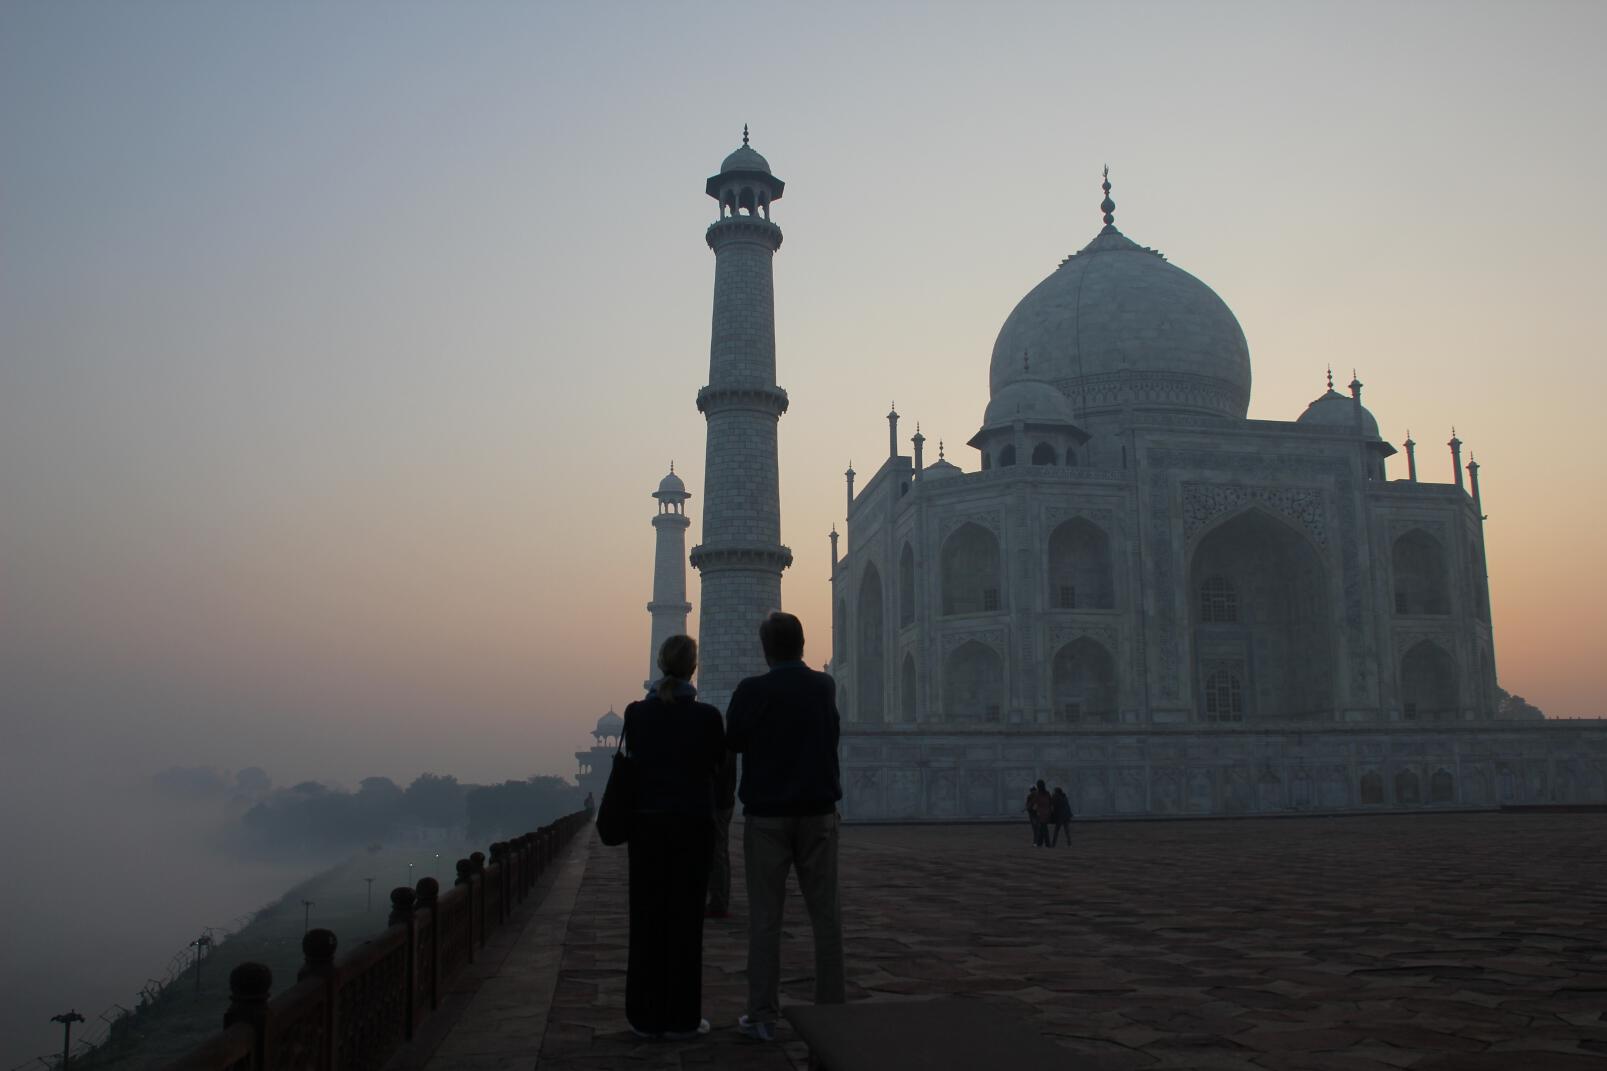 A couple gazes at the Taj Mahal from the bank of the Yamuna River.